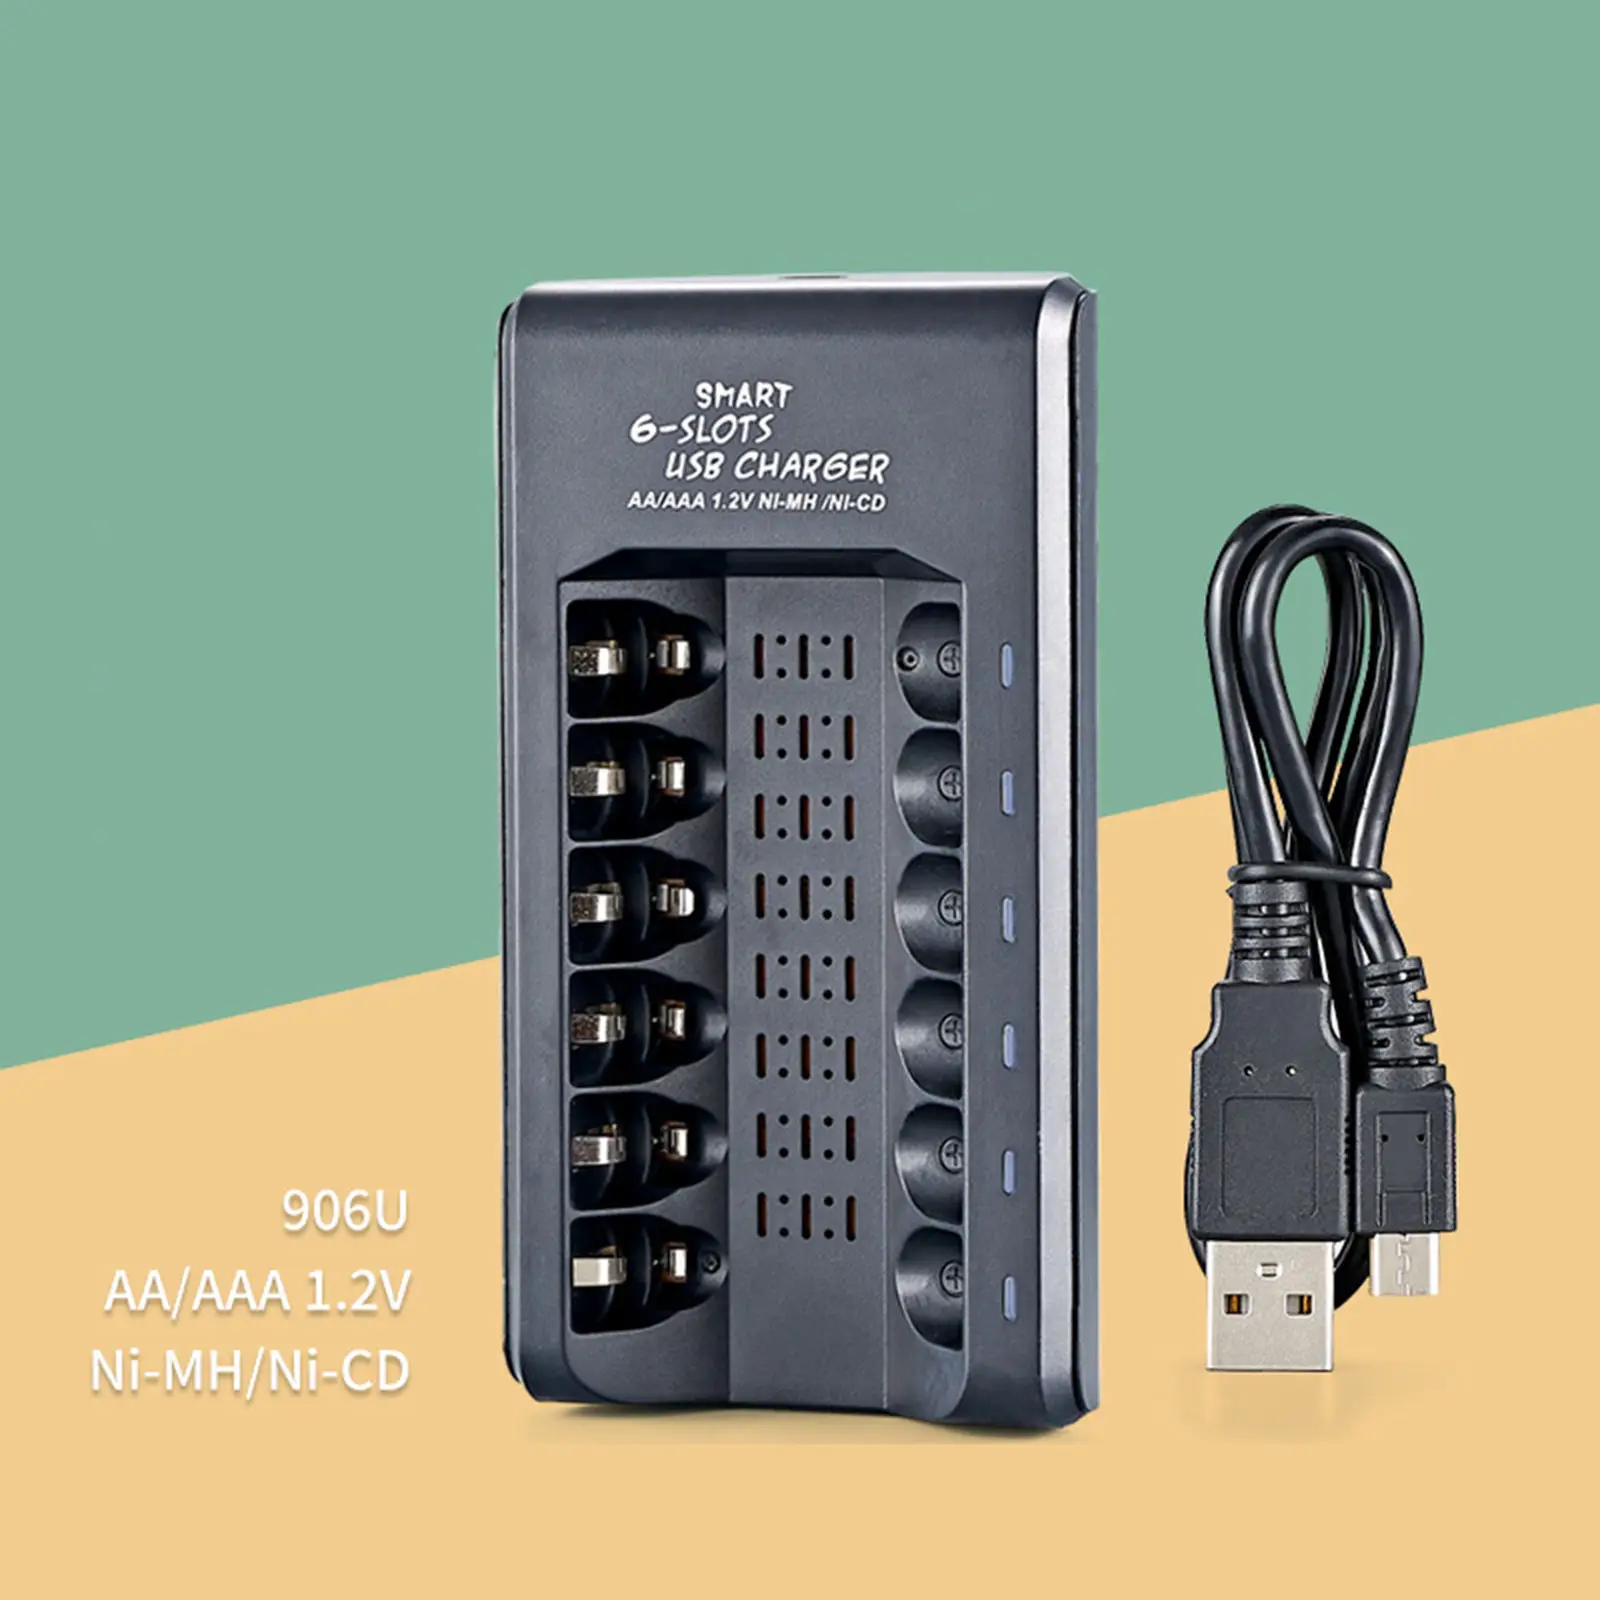 Universal AA/AAA Battery Charger LI-Ion Batteries USB Smart Intelligent USB 6-Slots Over-Charge Protection for Ni-MH Ni-CD